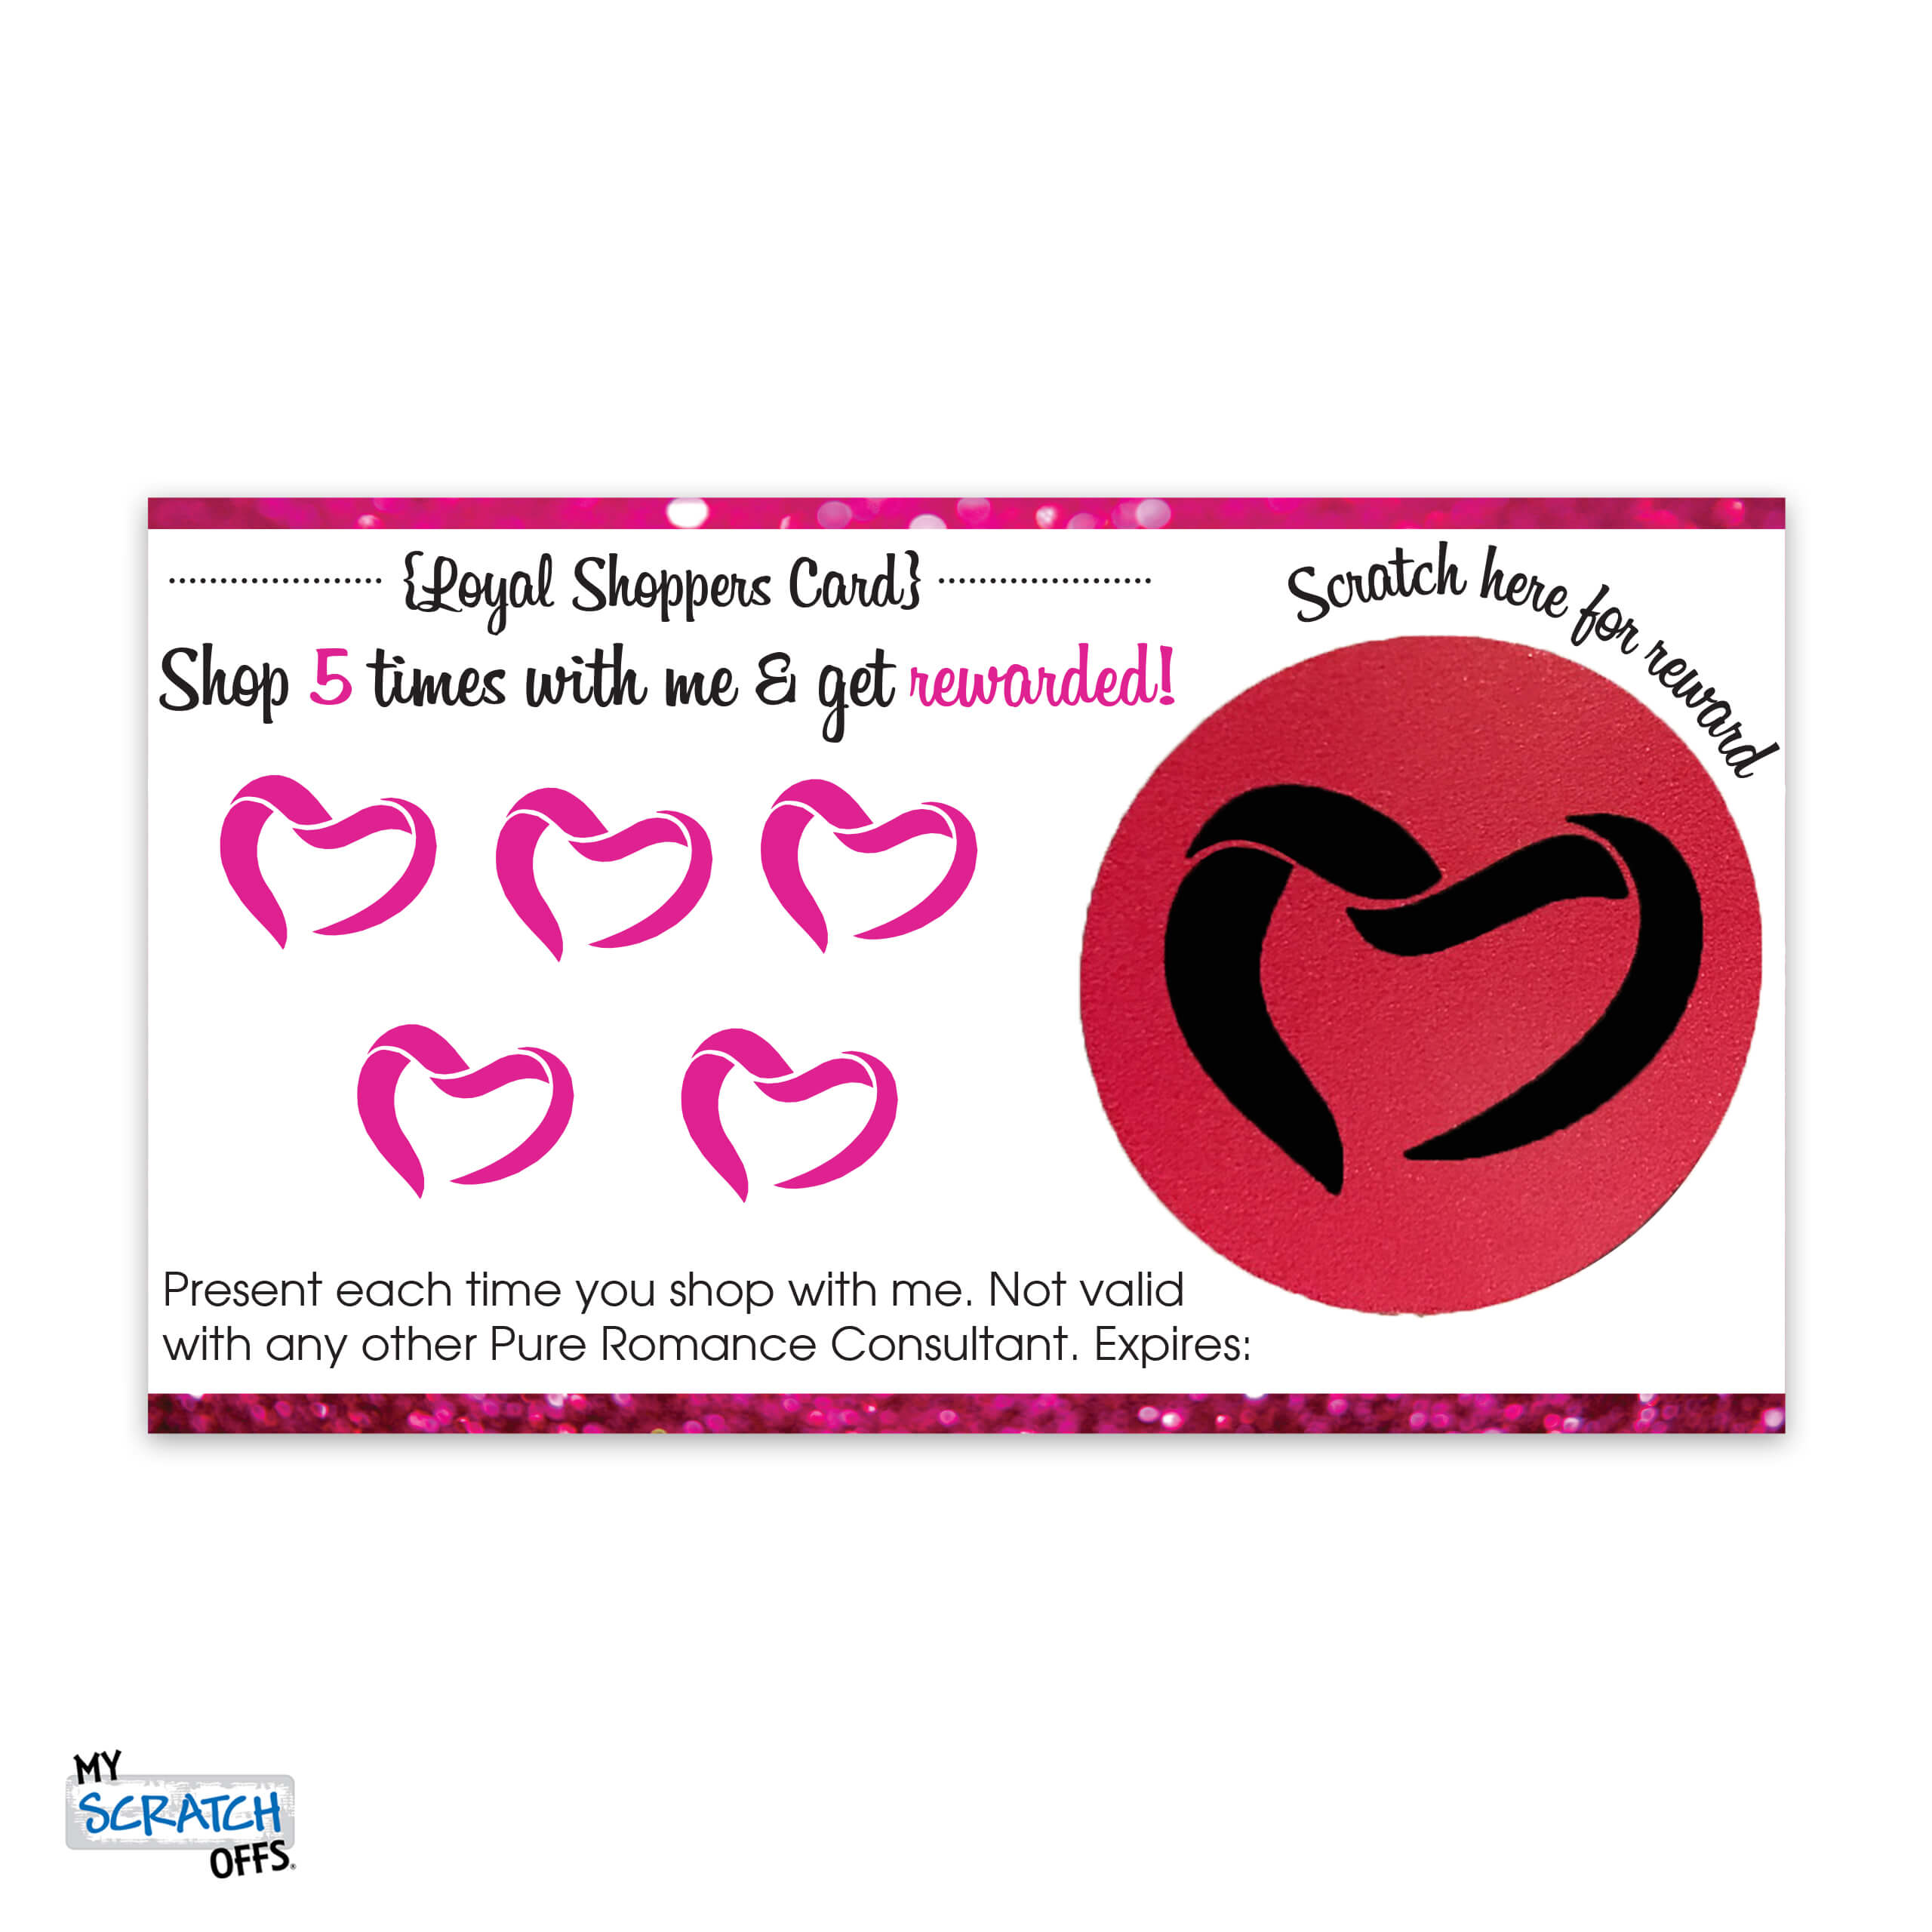 Pure Romance Loyal Shopper Card Scratch Off Party Promotion for DIY Self-Print (Digital Download) - My Scratch Offs